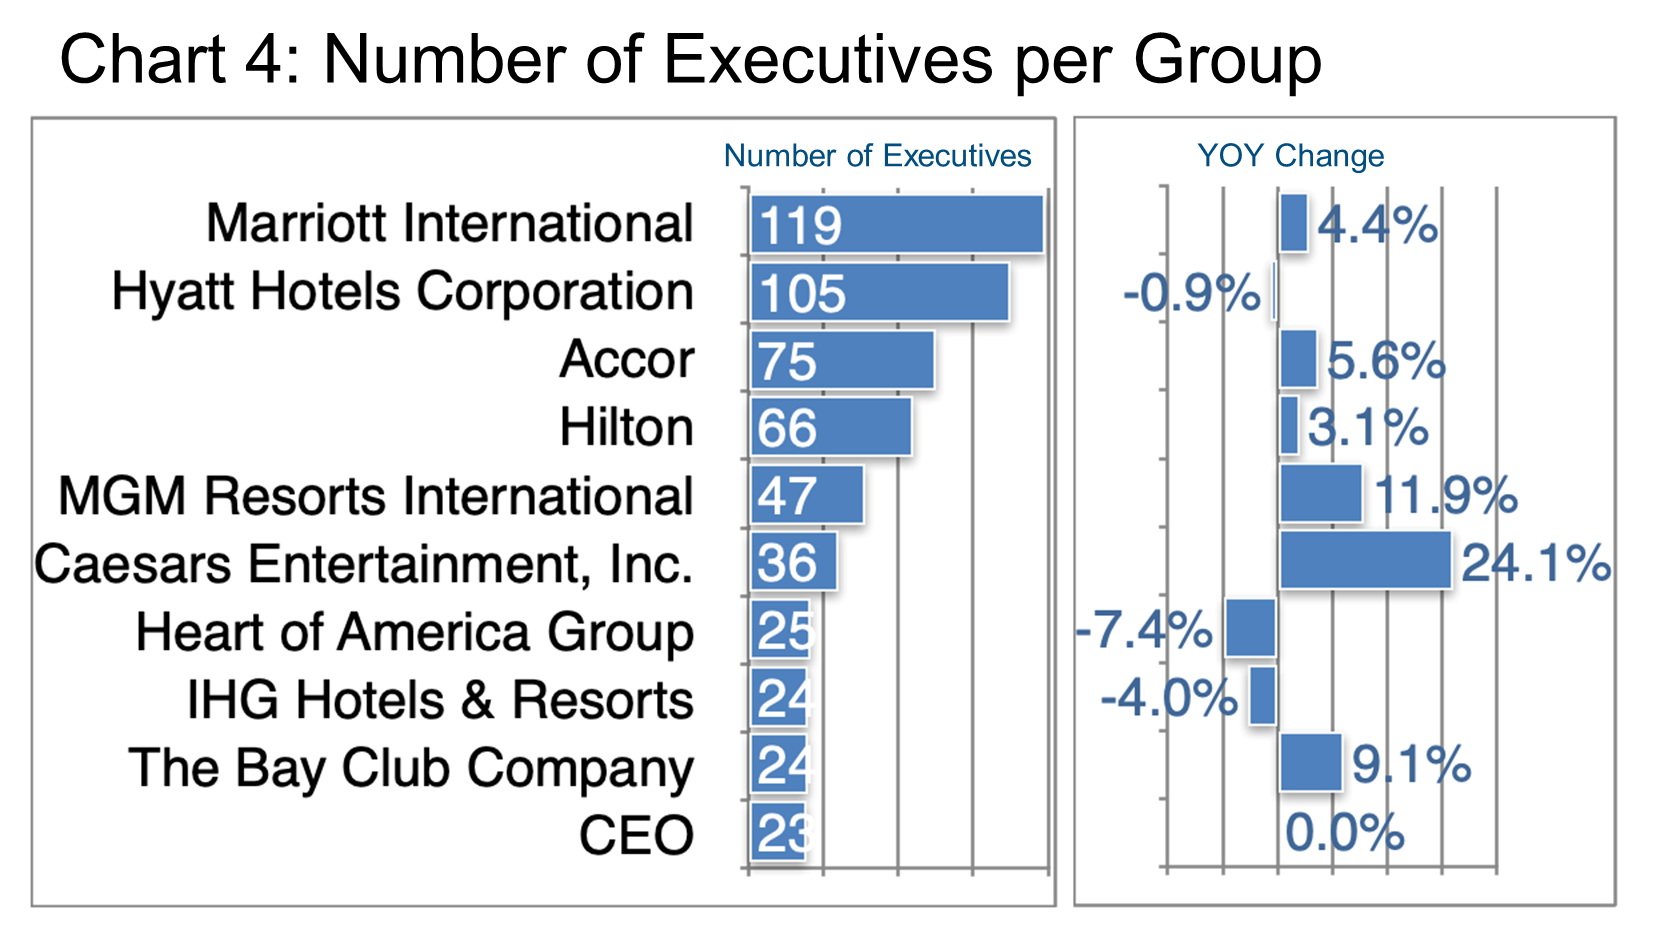 Number of Executives per Group-Chart 4